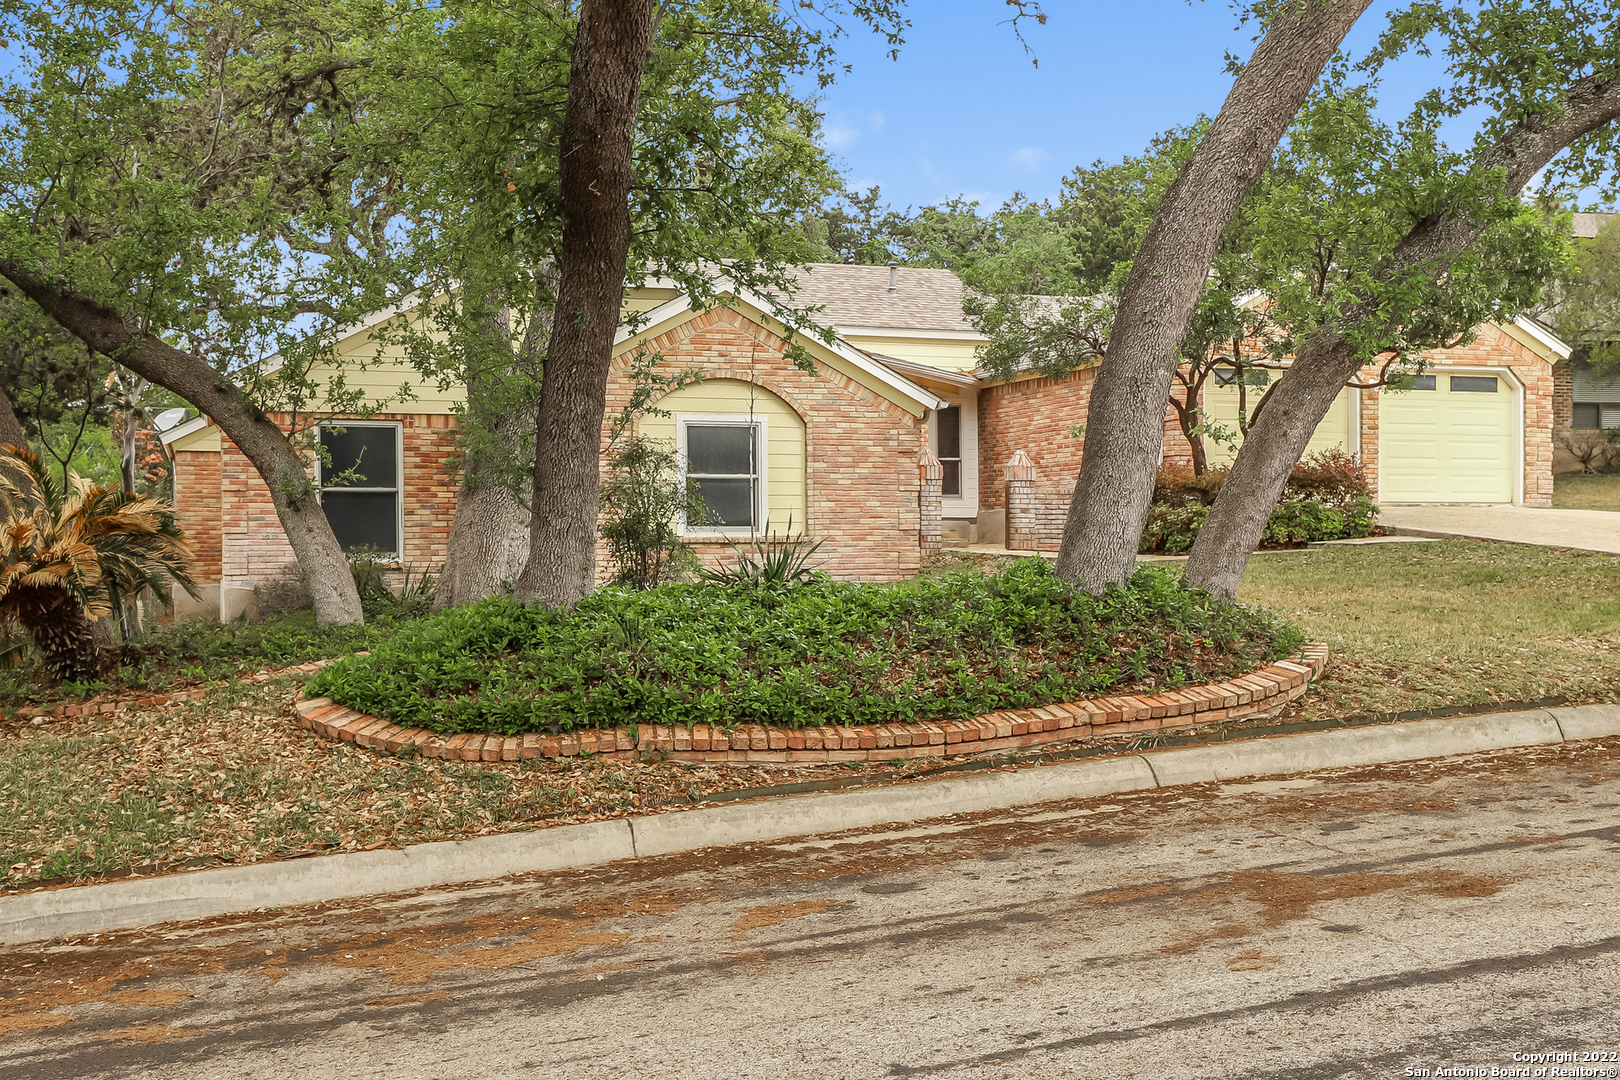 This San Antonio one-story cul-de-sac home offers an in-ground pool, a patio, and a two-car garage. This home has been virtually staged to illustrate its potential.